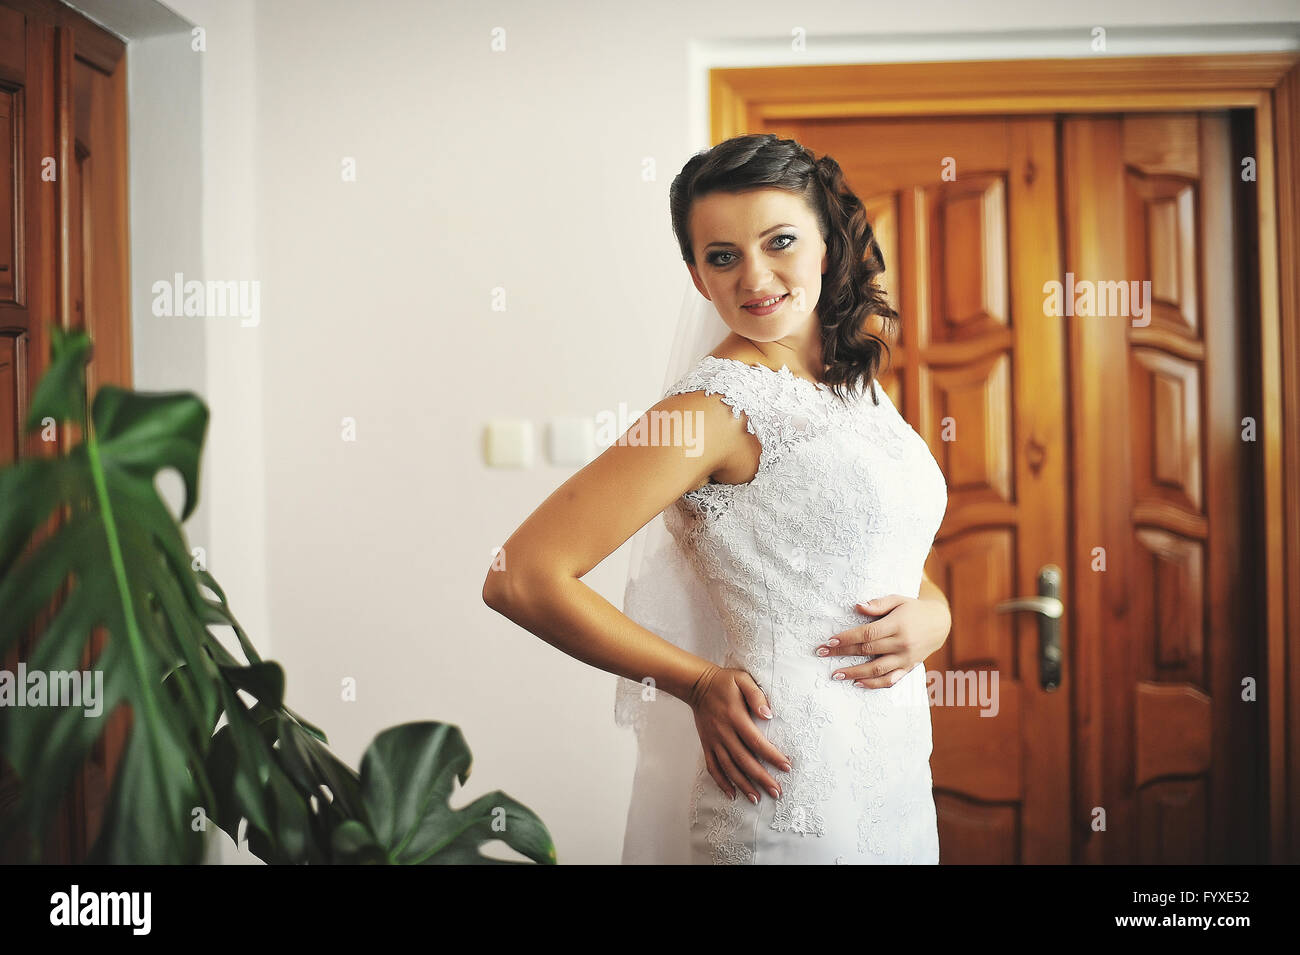 Bride posed at her morning wedding day Stock Photo